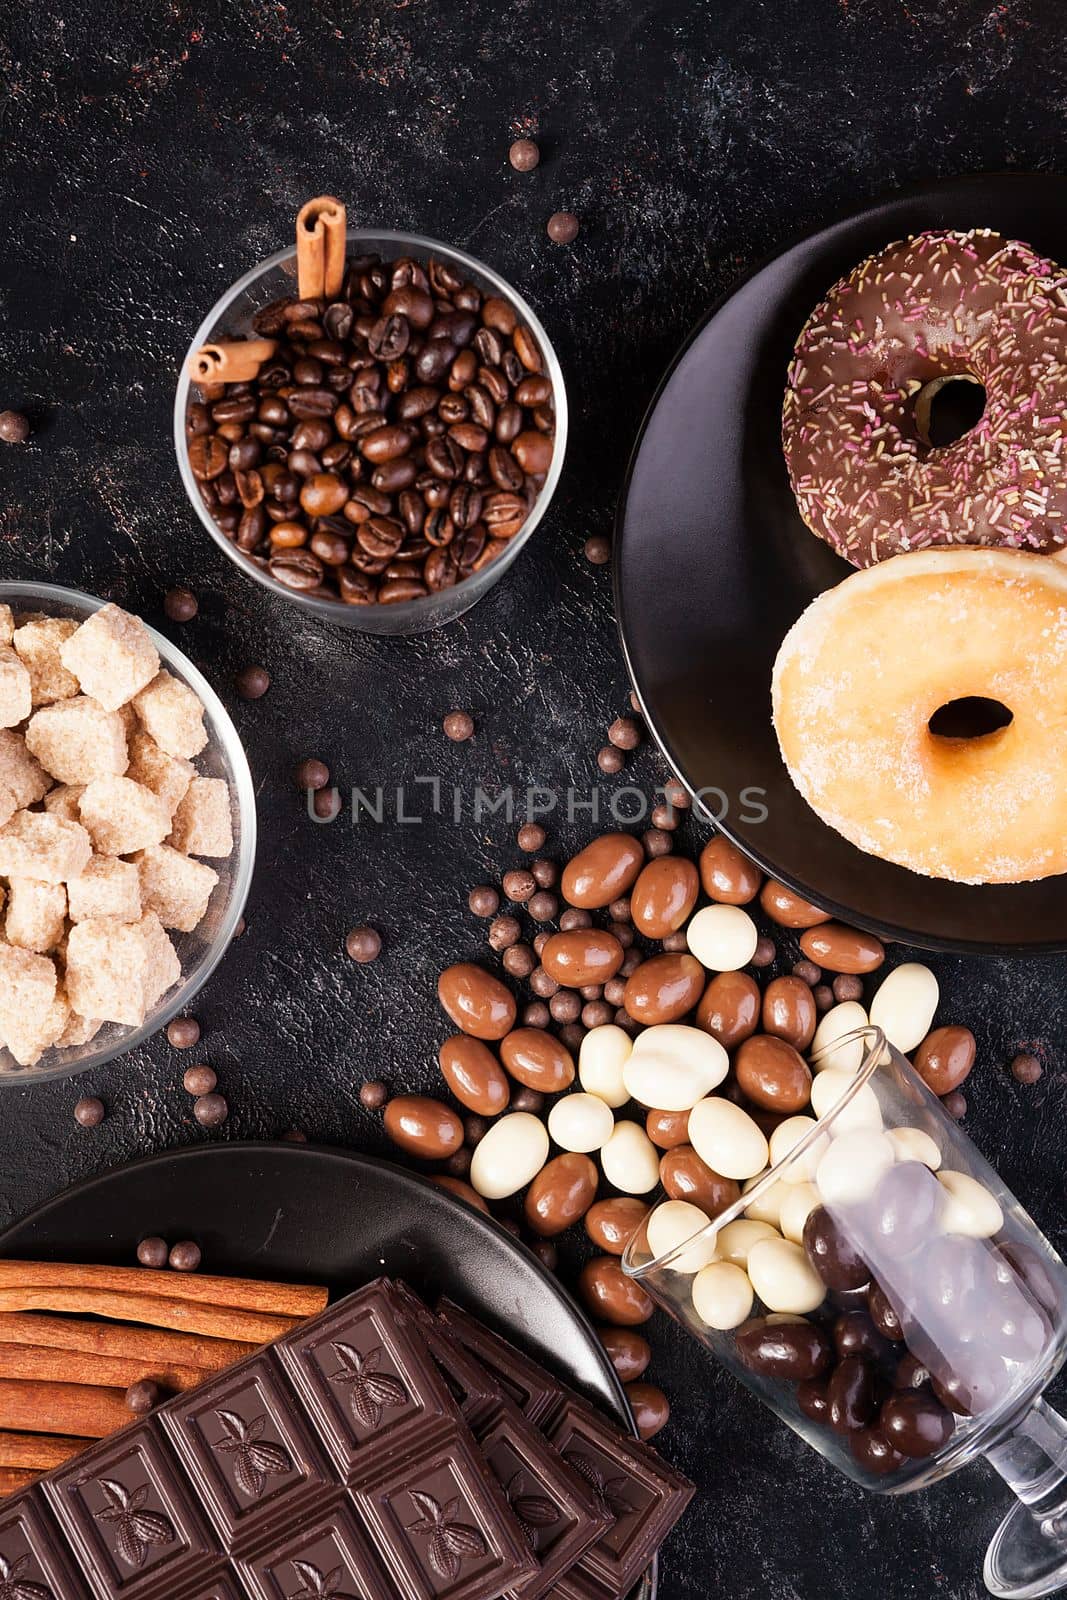 Top view of peanuts in chocolate, spilled on the dark board, next to chocolate tablets, donuts, brown sugar and coffee beans. Studio photo